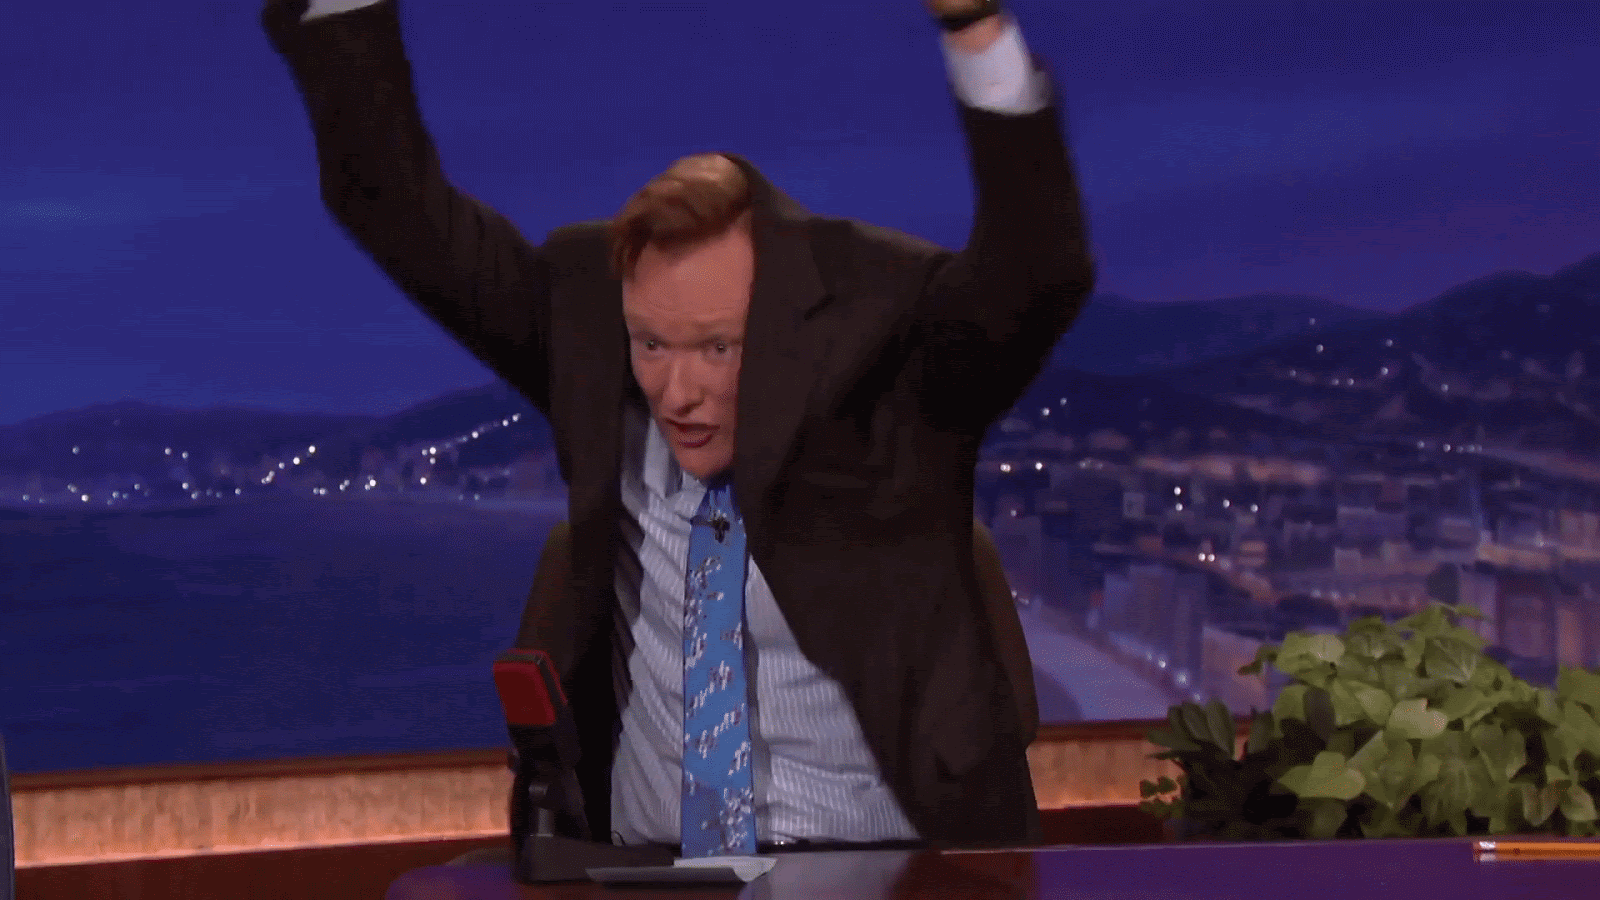 gif of Conan O&#39;Brien in a tie and button up shirt, with his blazer pulled up over his head, waving his arms and making a goofy face.